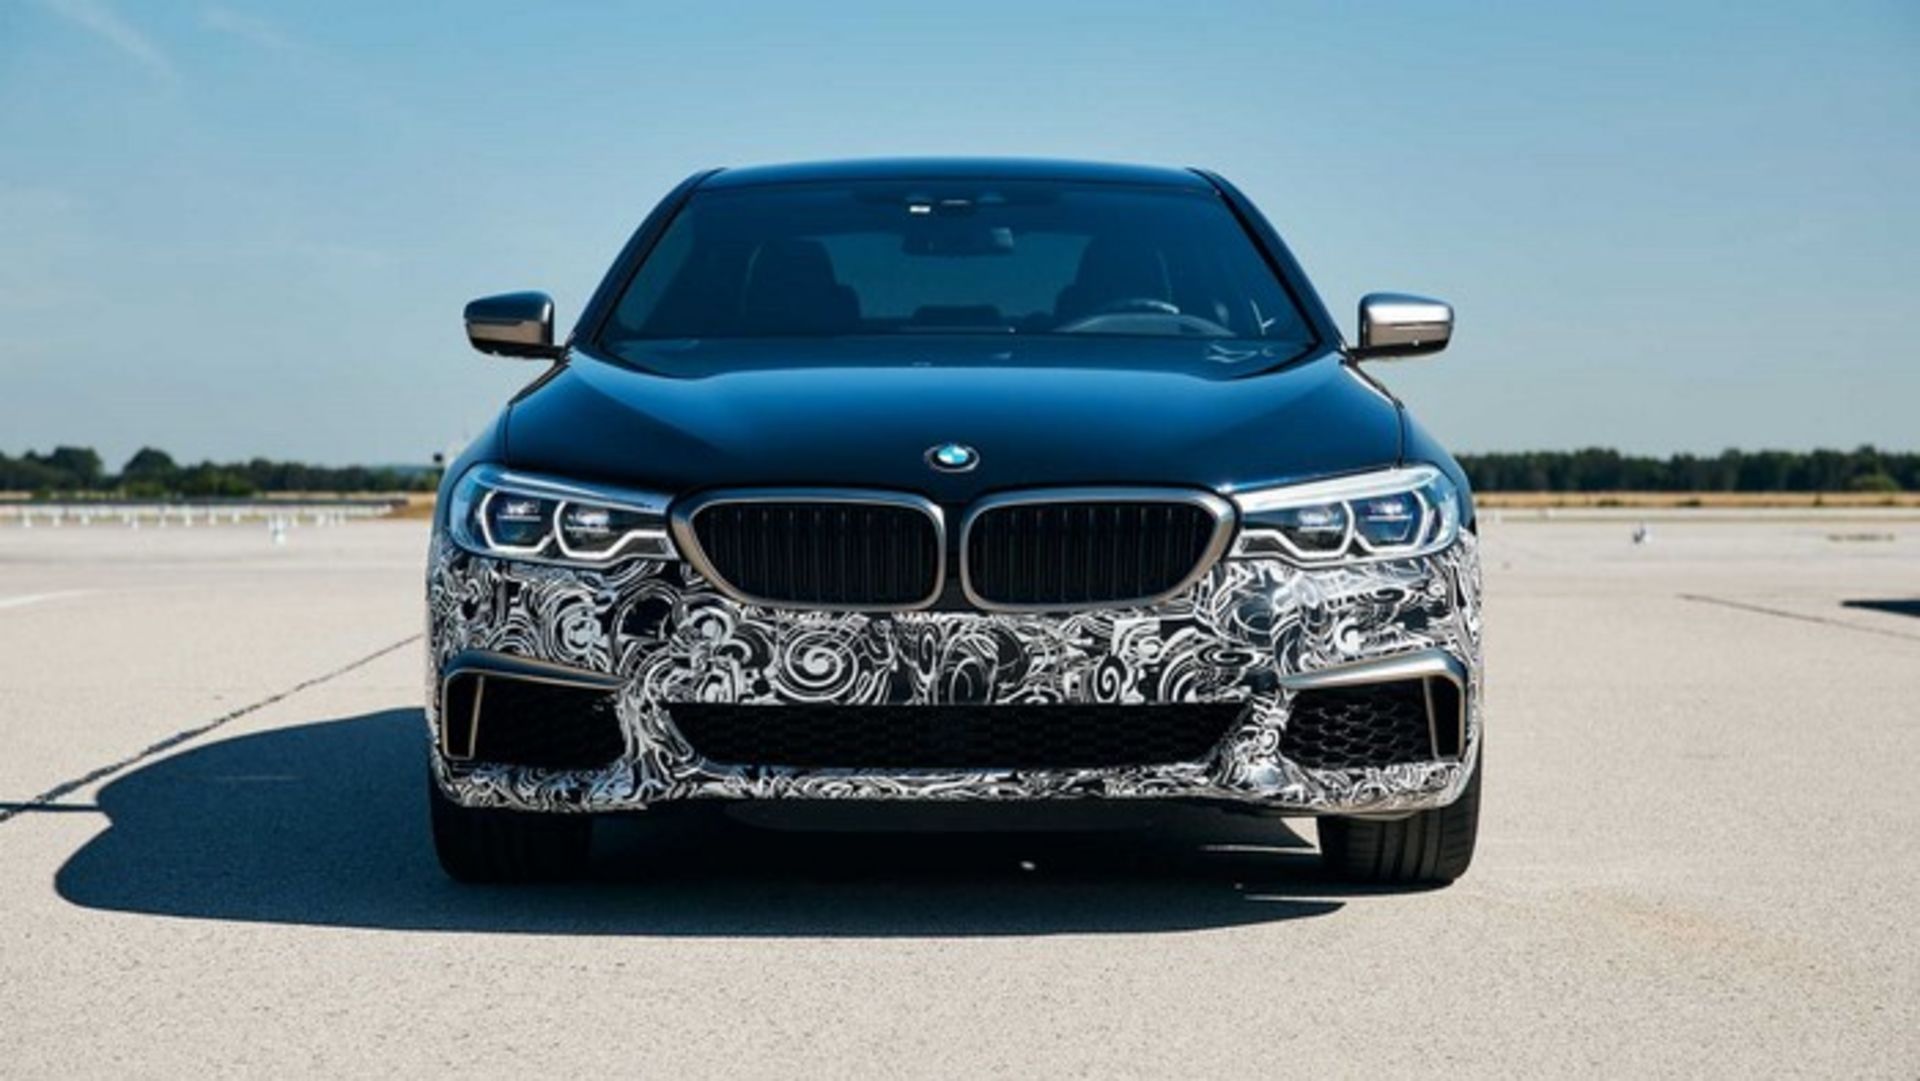 BMW 5 Series Experimental Electric Vehicle 